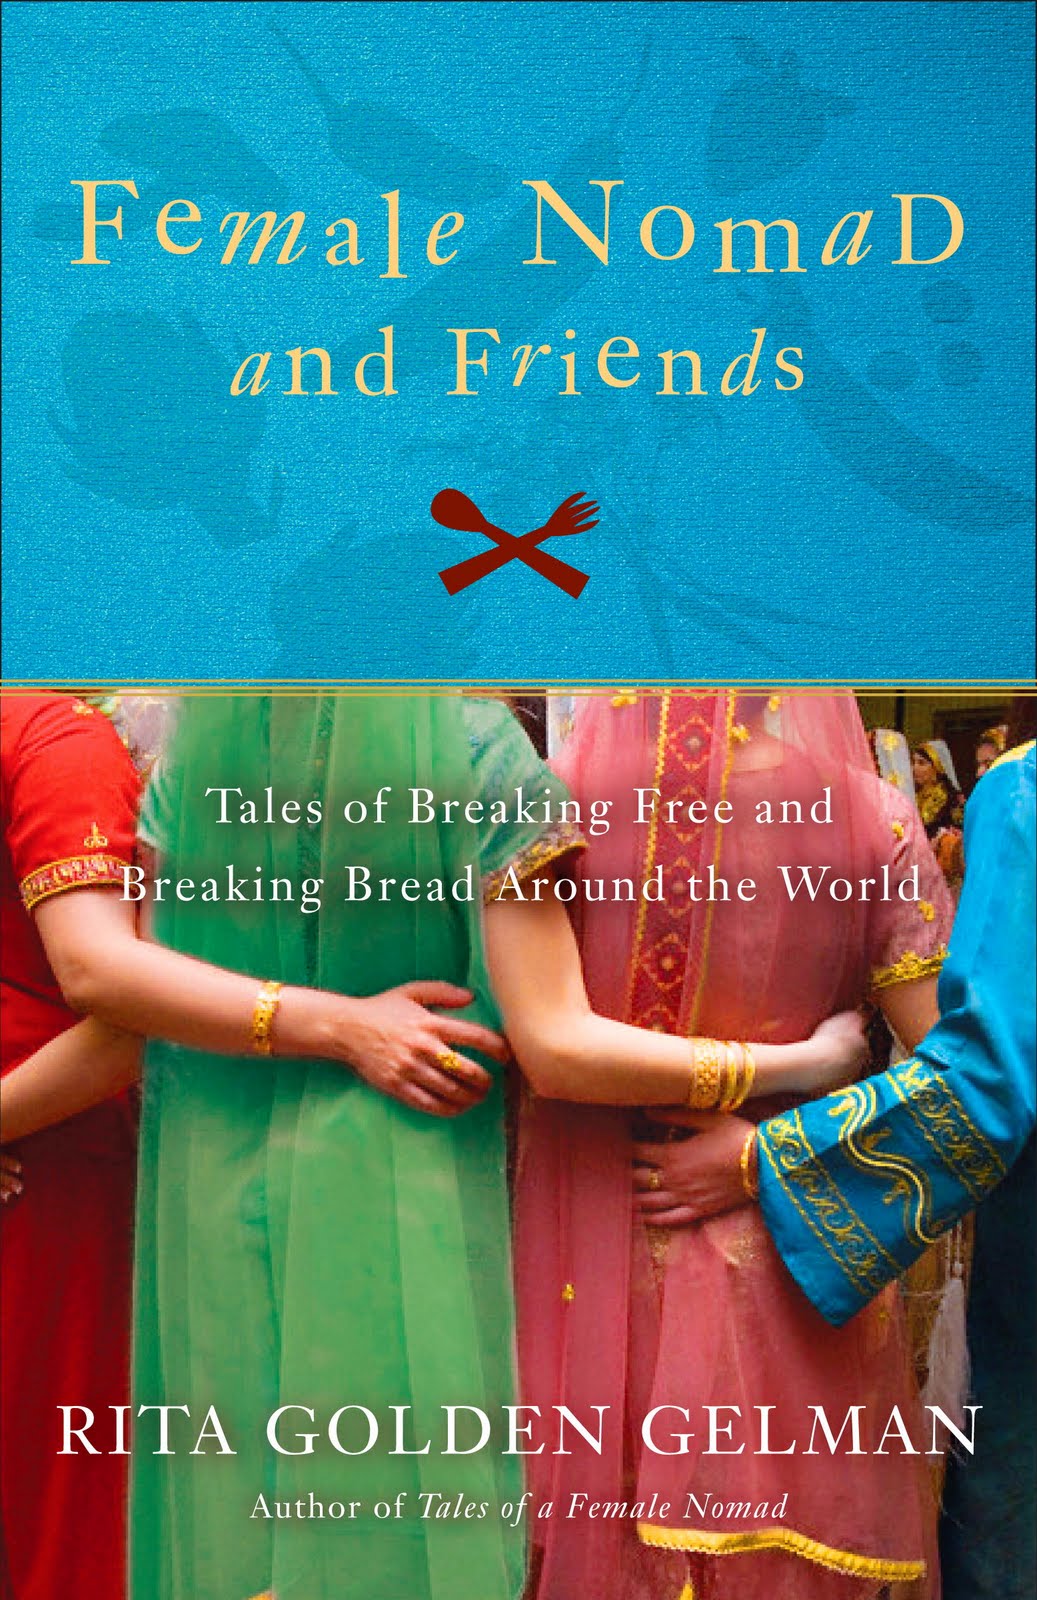 Book Review: Female Nomad and Friends